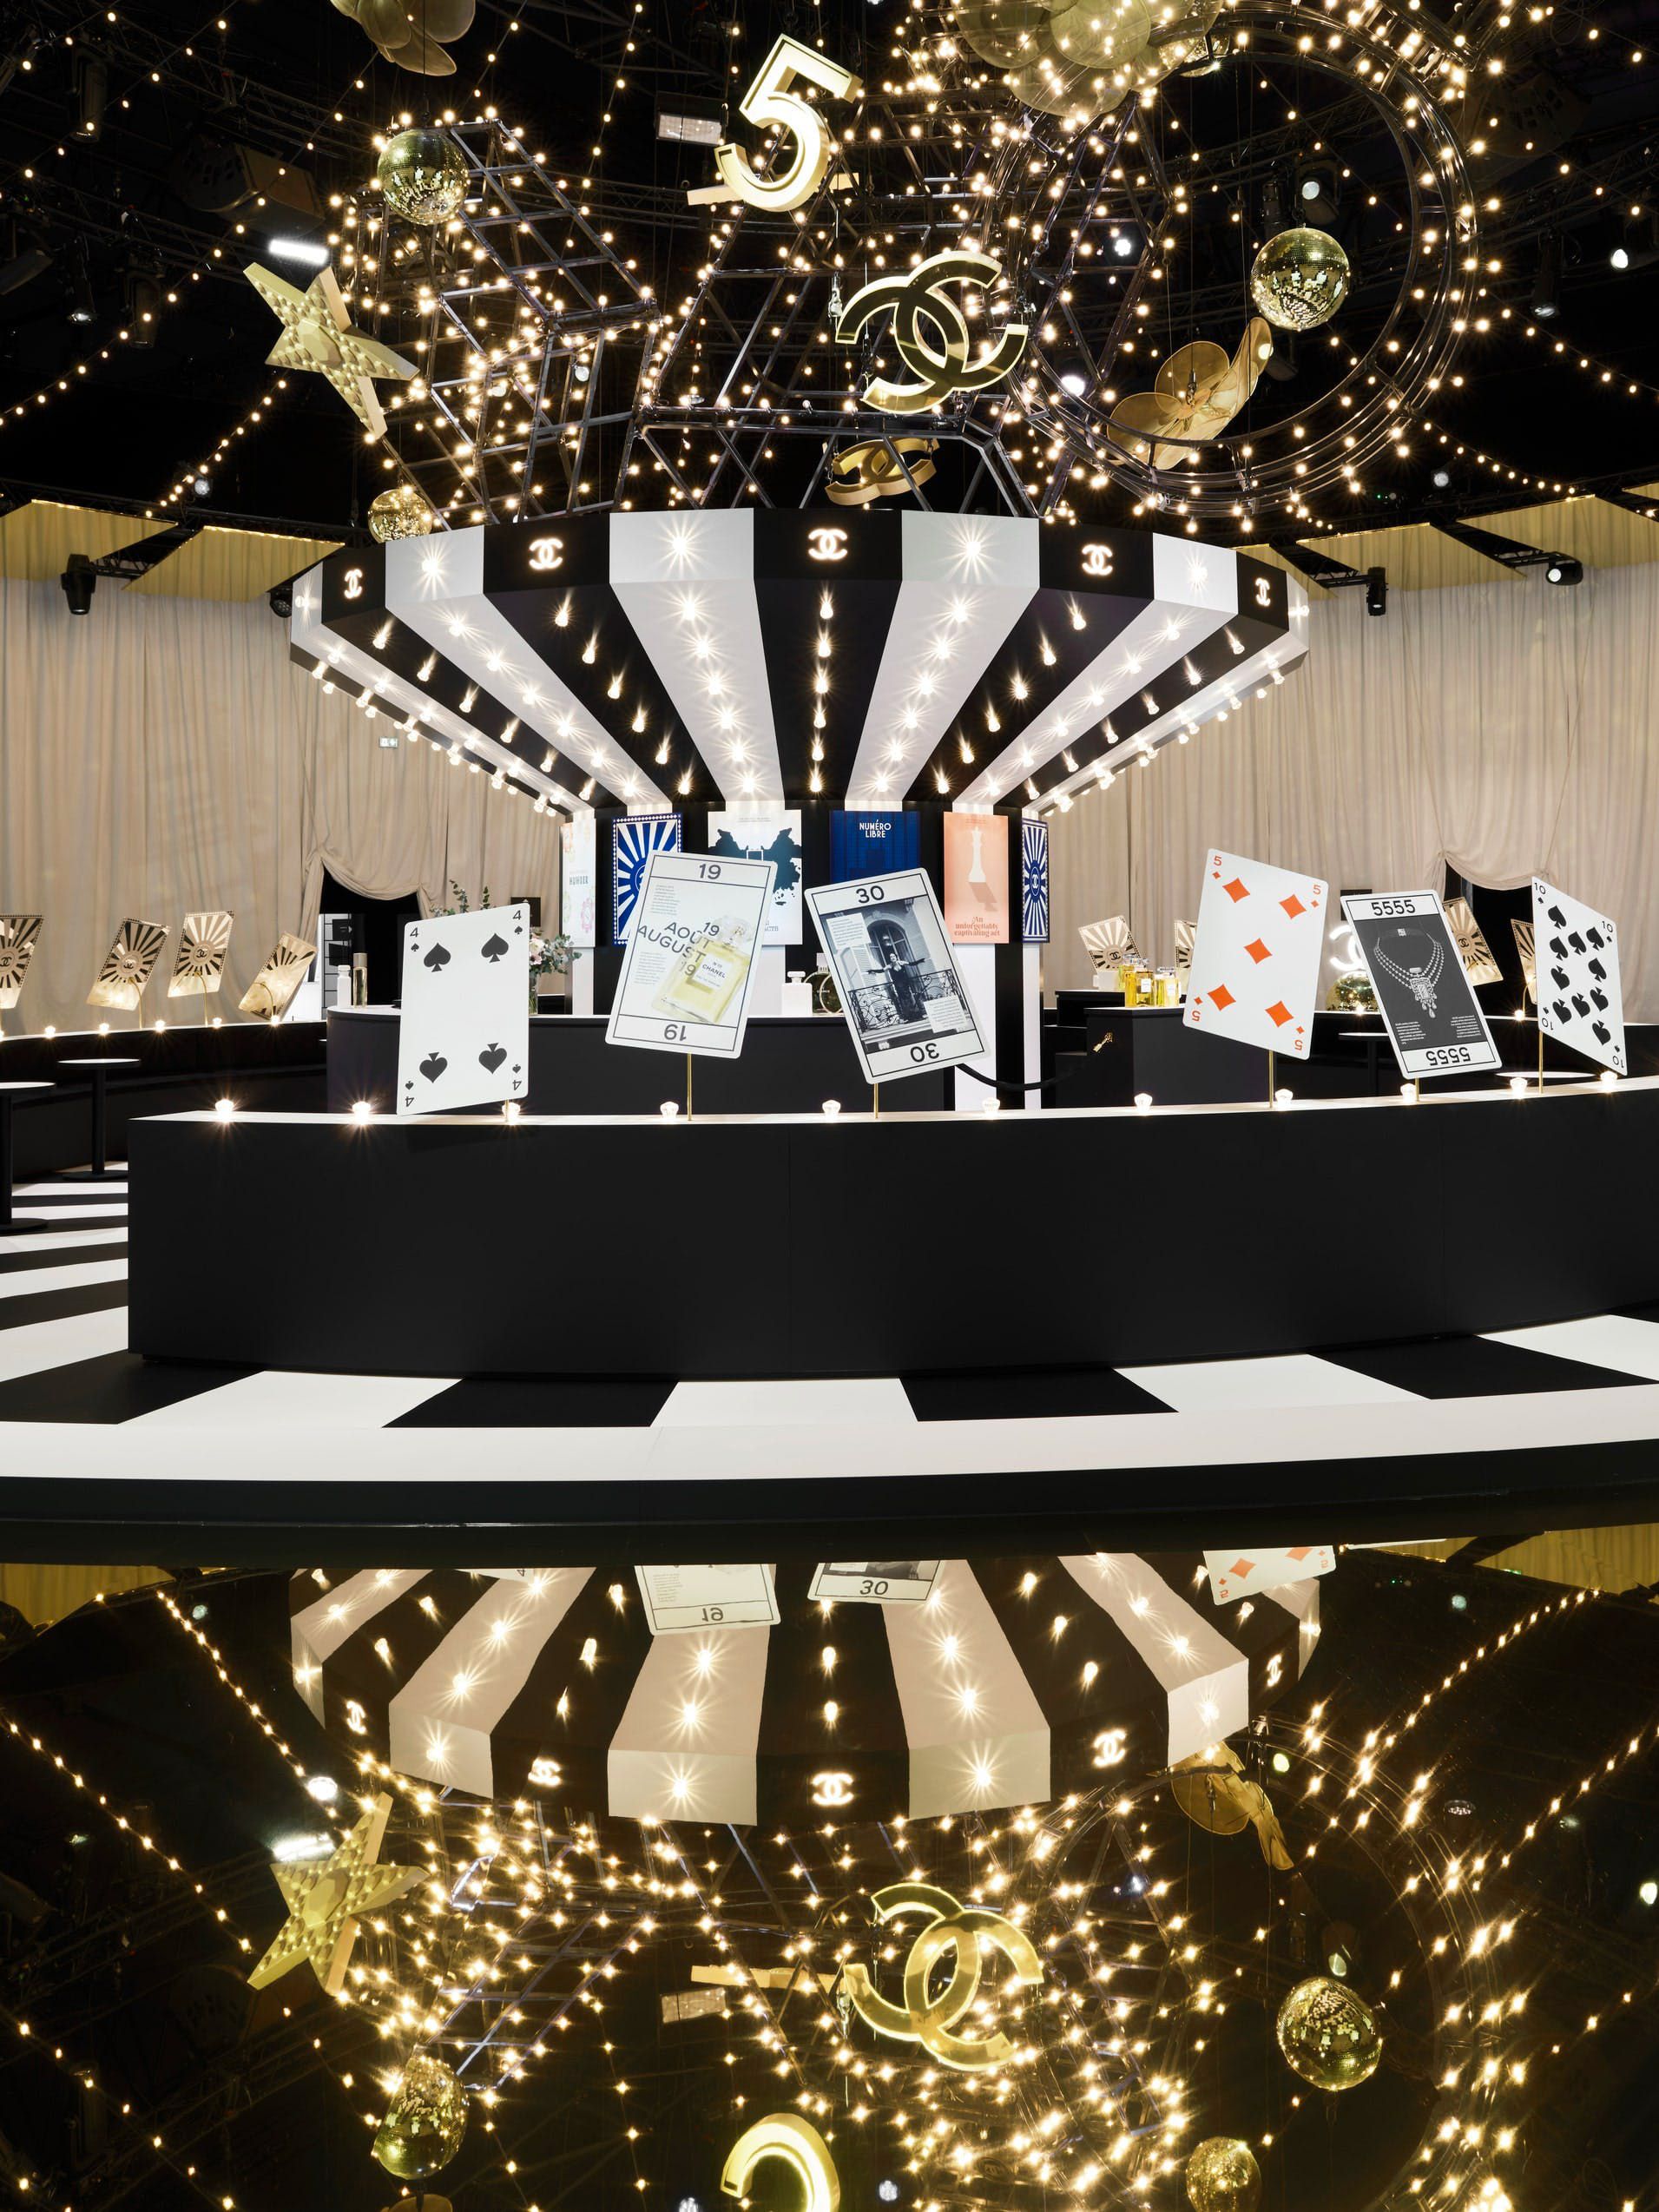 Inside Chanel's New Fragrance Exhibit: Magic, Card Games, and More